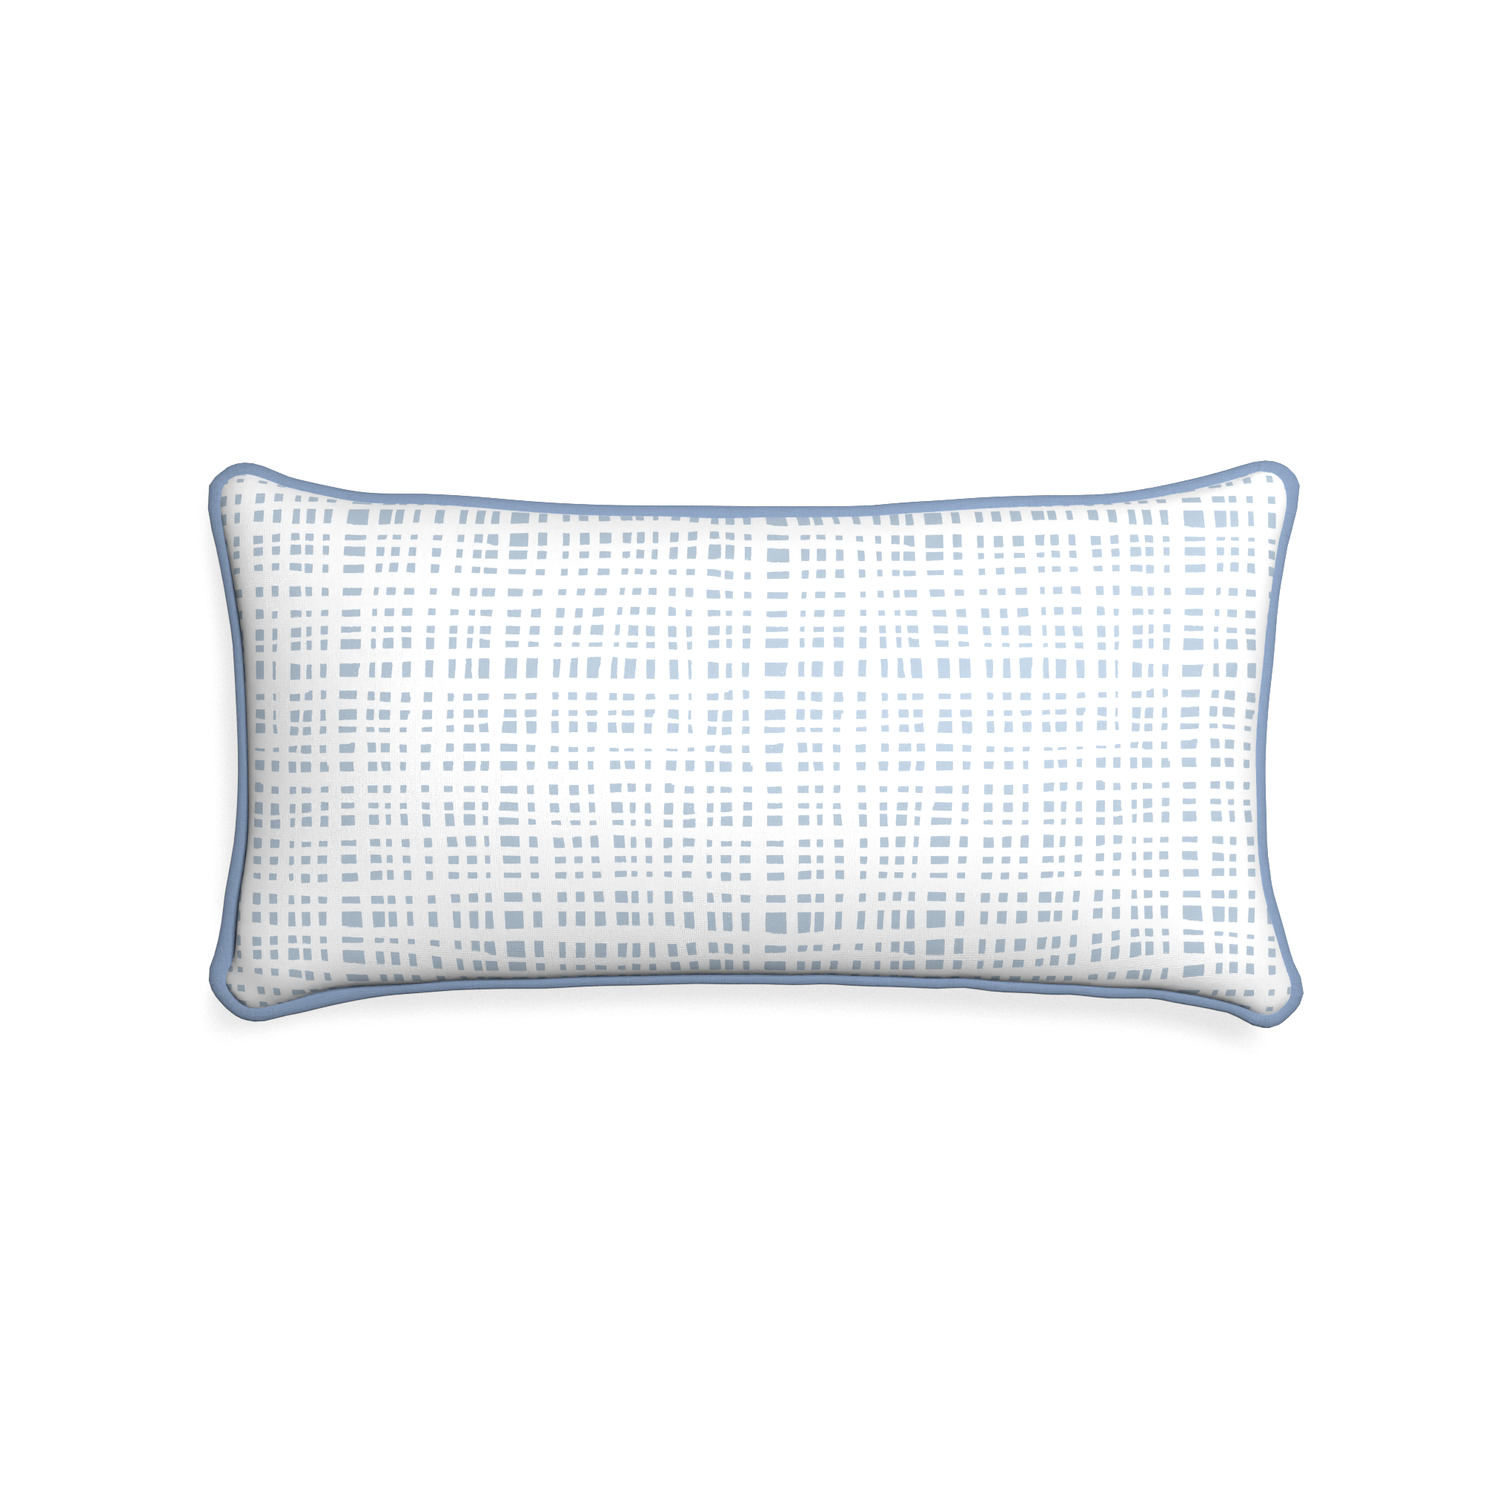 Midi-lumbar ginger sky custom plaid sky bluepillow with sky piping on white background